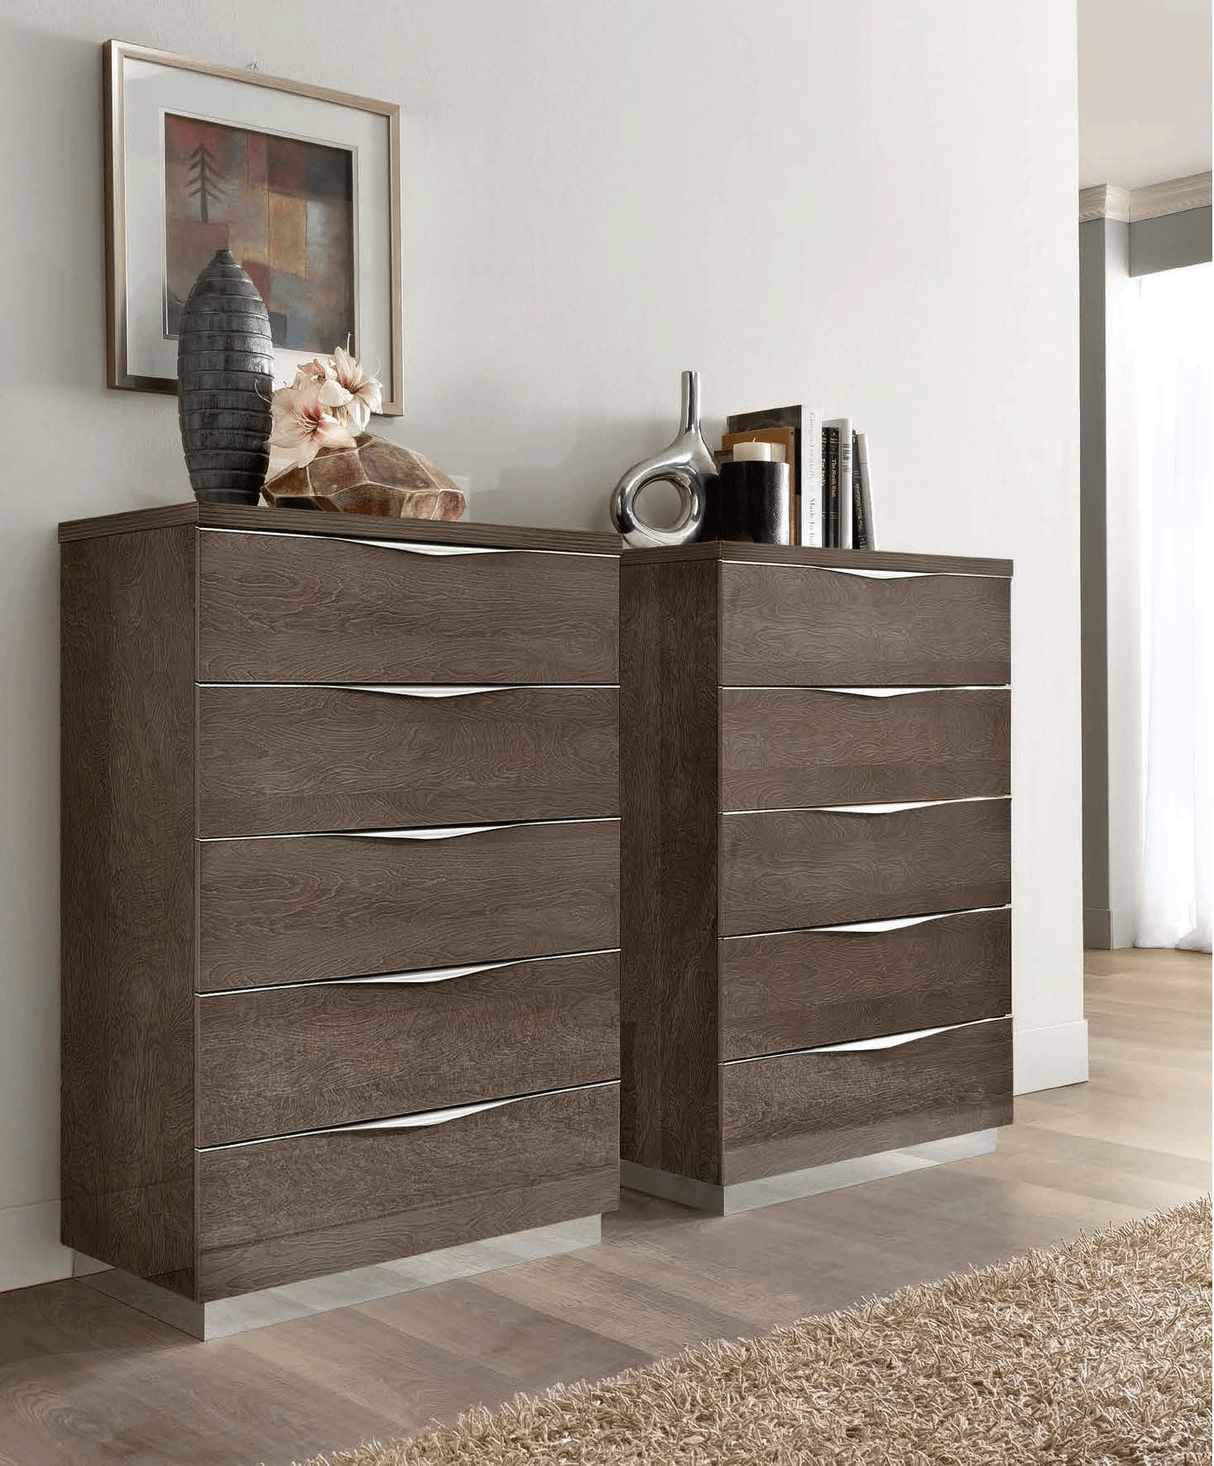 Platinum 5 Drawer Chest - Silver Birch by Camelgroup